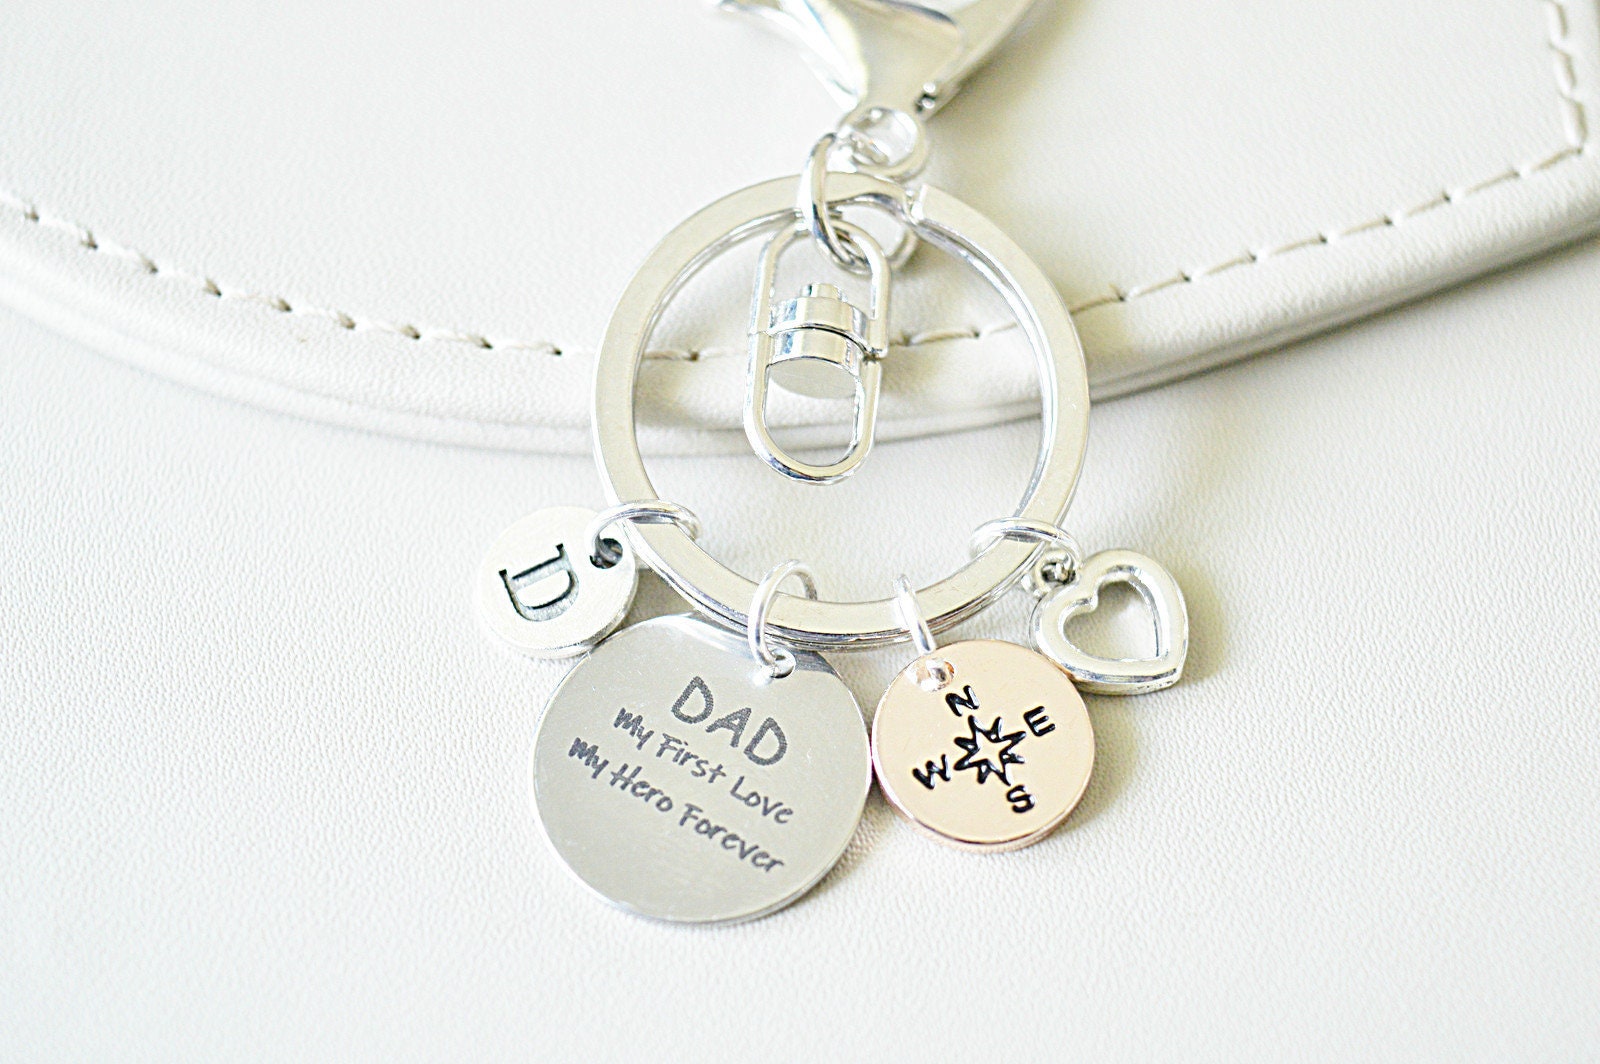 Dad Birthday Gift, Gift From Daughter, Dad Gift Wedding, Dad Keyring, Dad Keychain, Dad Hero Dad Memorial, Dad Personalised, Unique Gifts